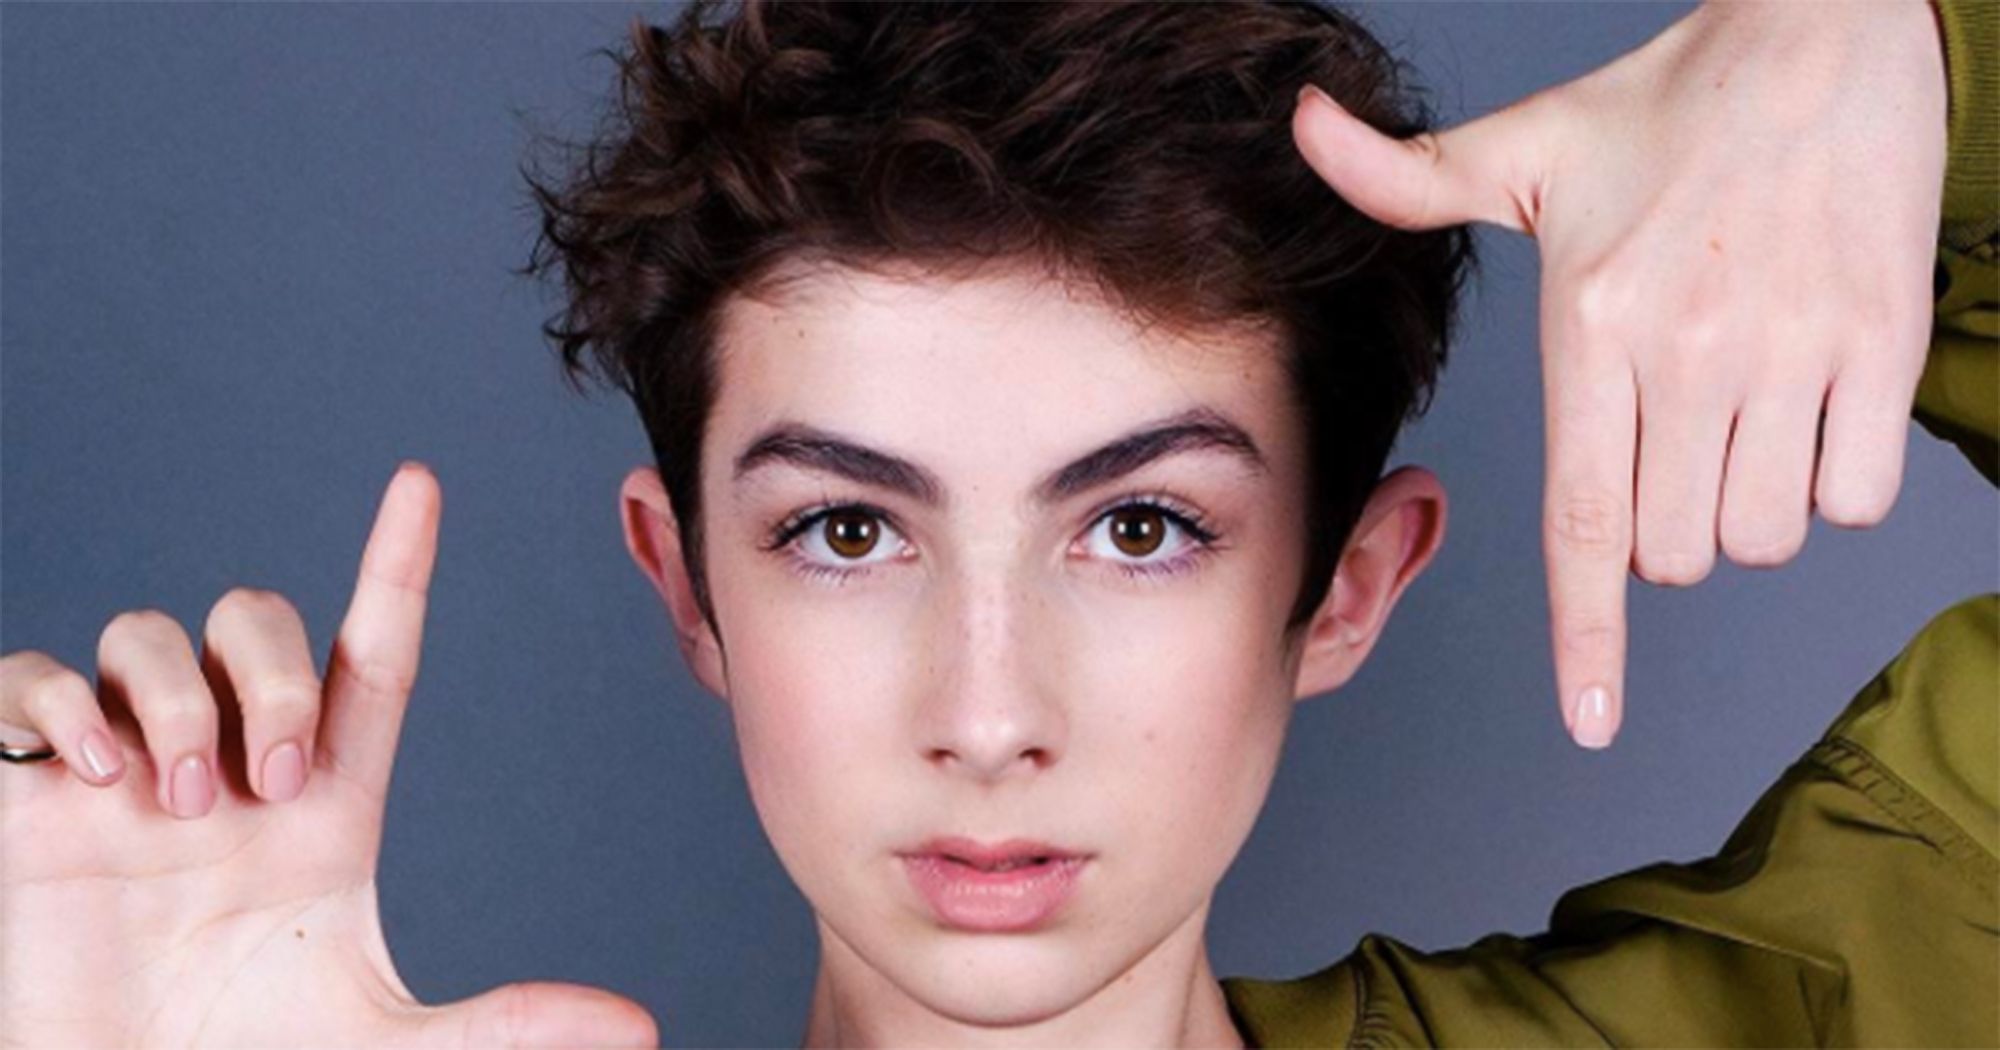 Lewys Ball is an 18-year-old beauty chameleon who injects loveable sass and wit into his online make-up tutorials